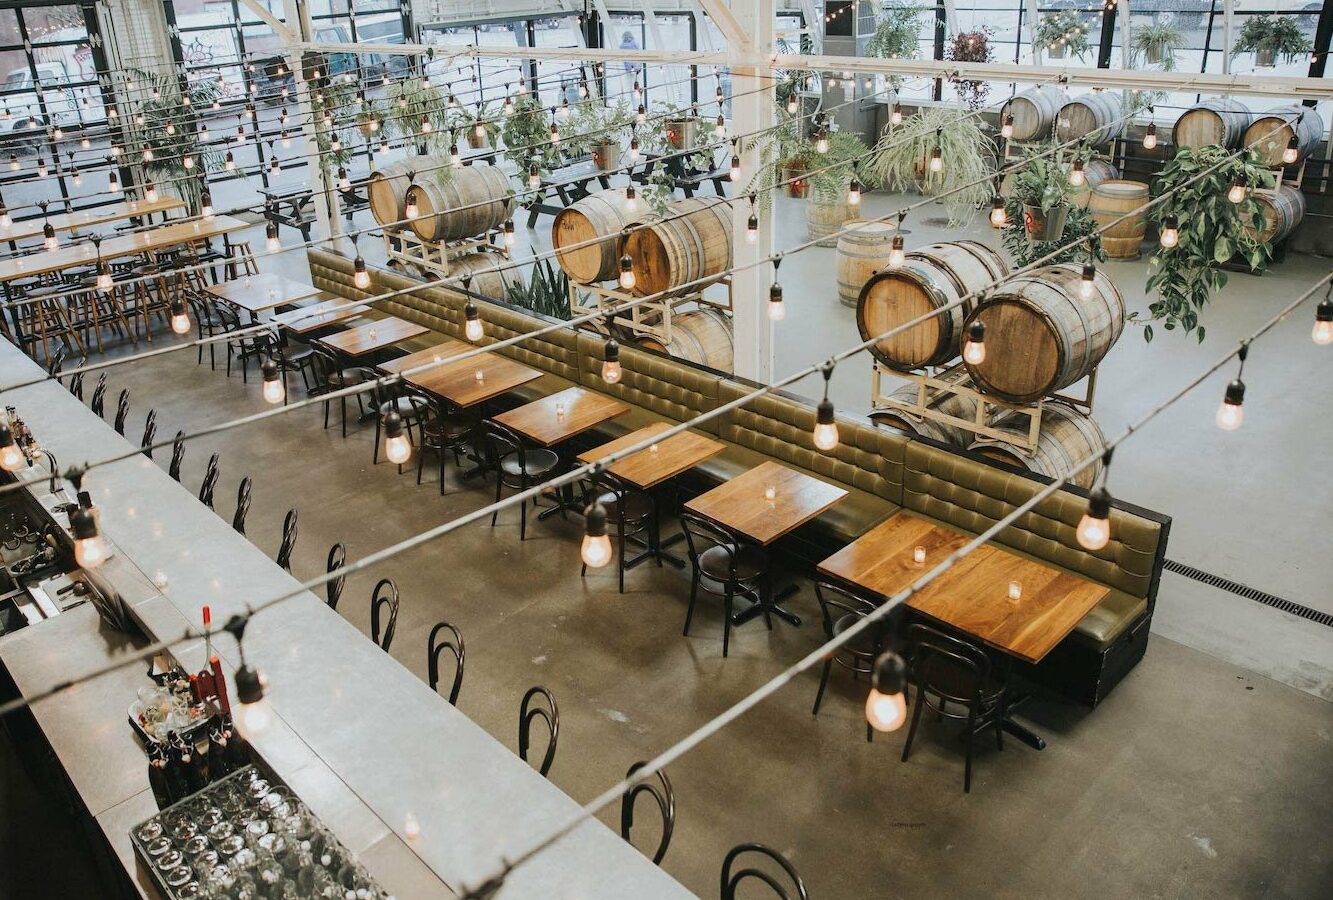 Large winery with natural light, two-story ceilings, and bursts of greenery.